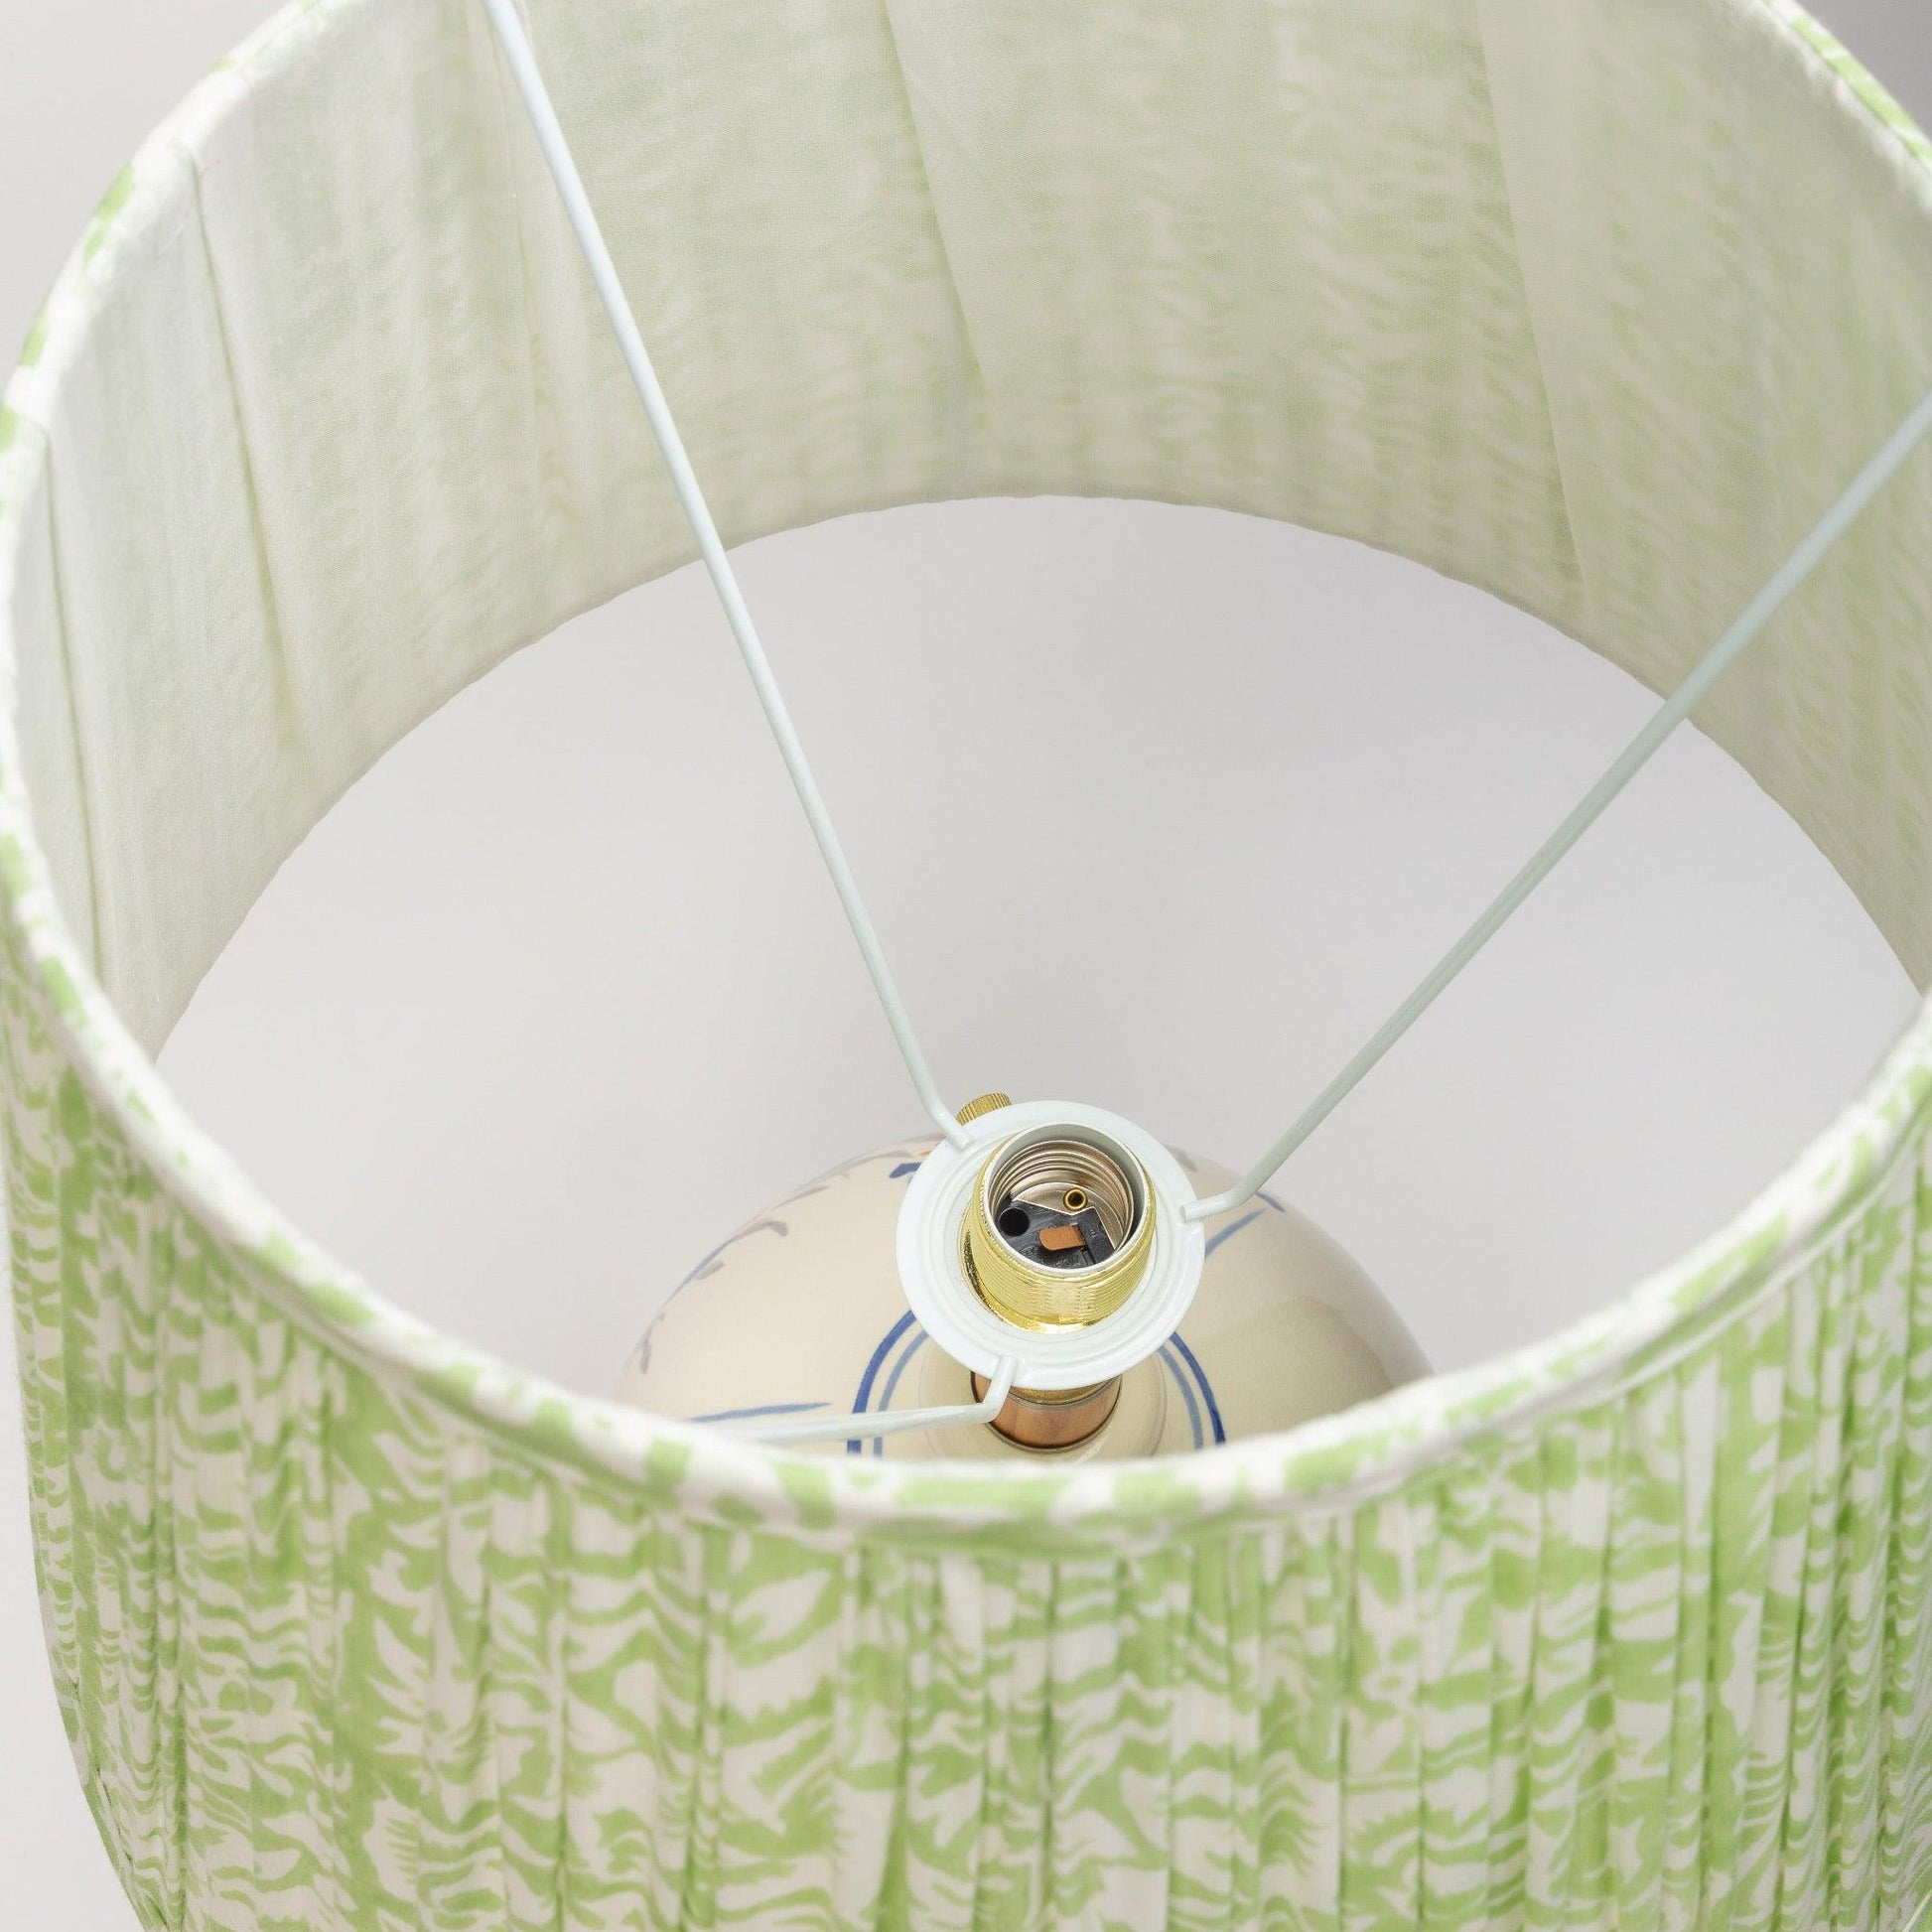 Detail shot of the Uno E26 slip over fitting for organic cotton pleated lampshades in colorful hand block prints.